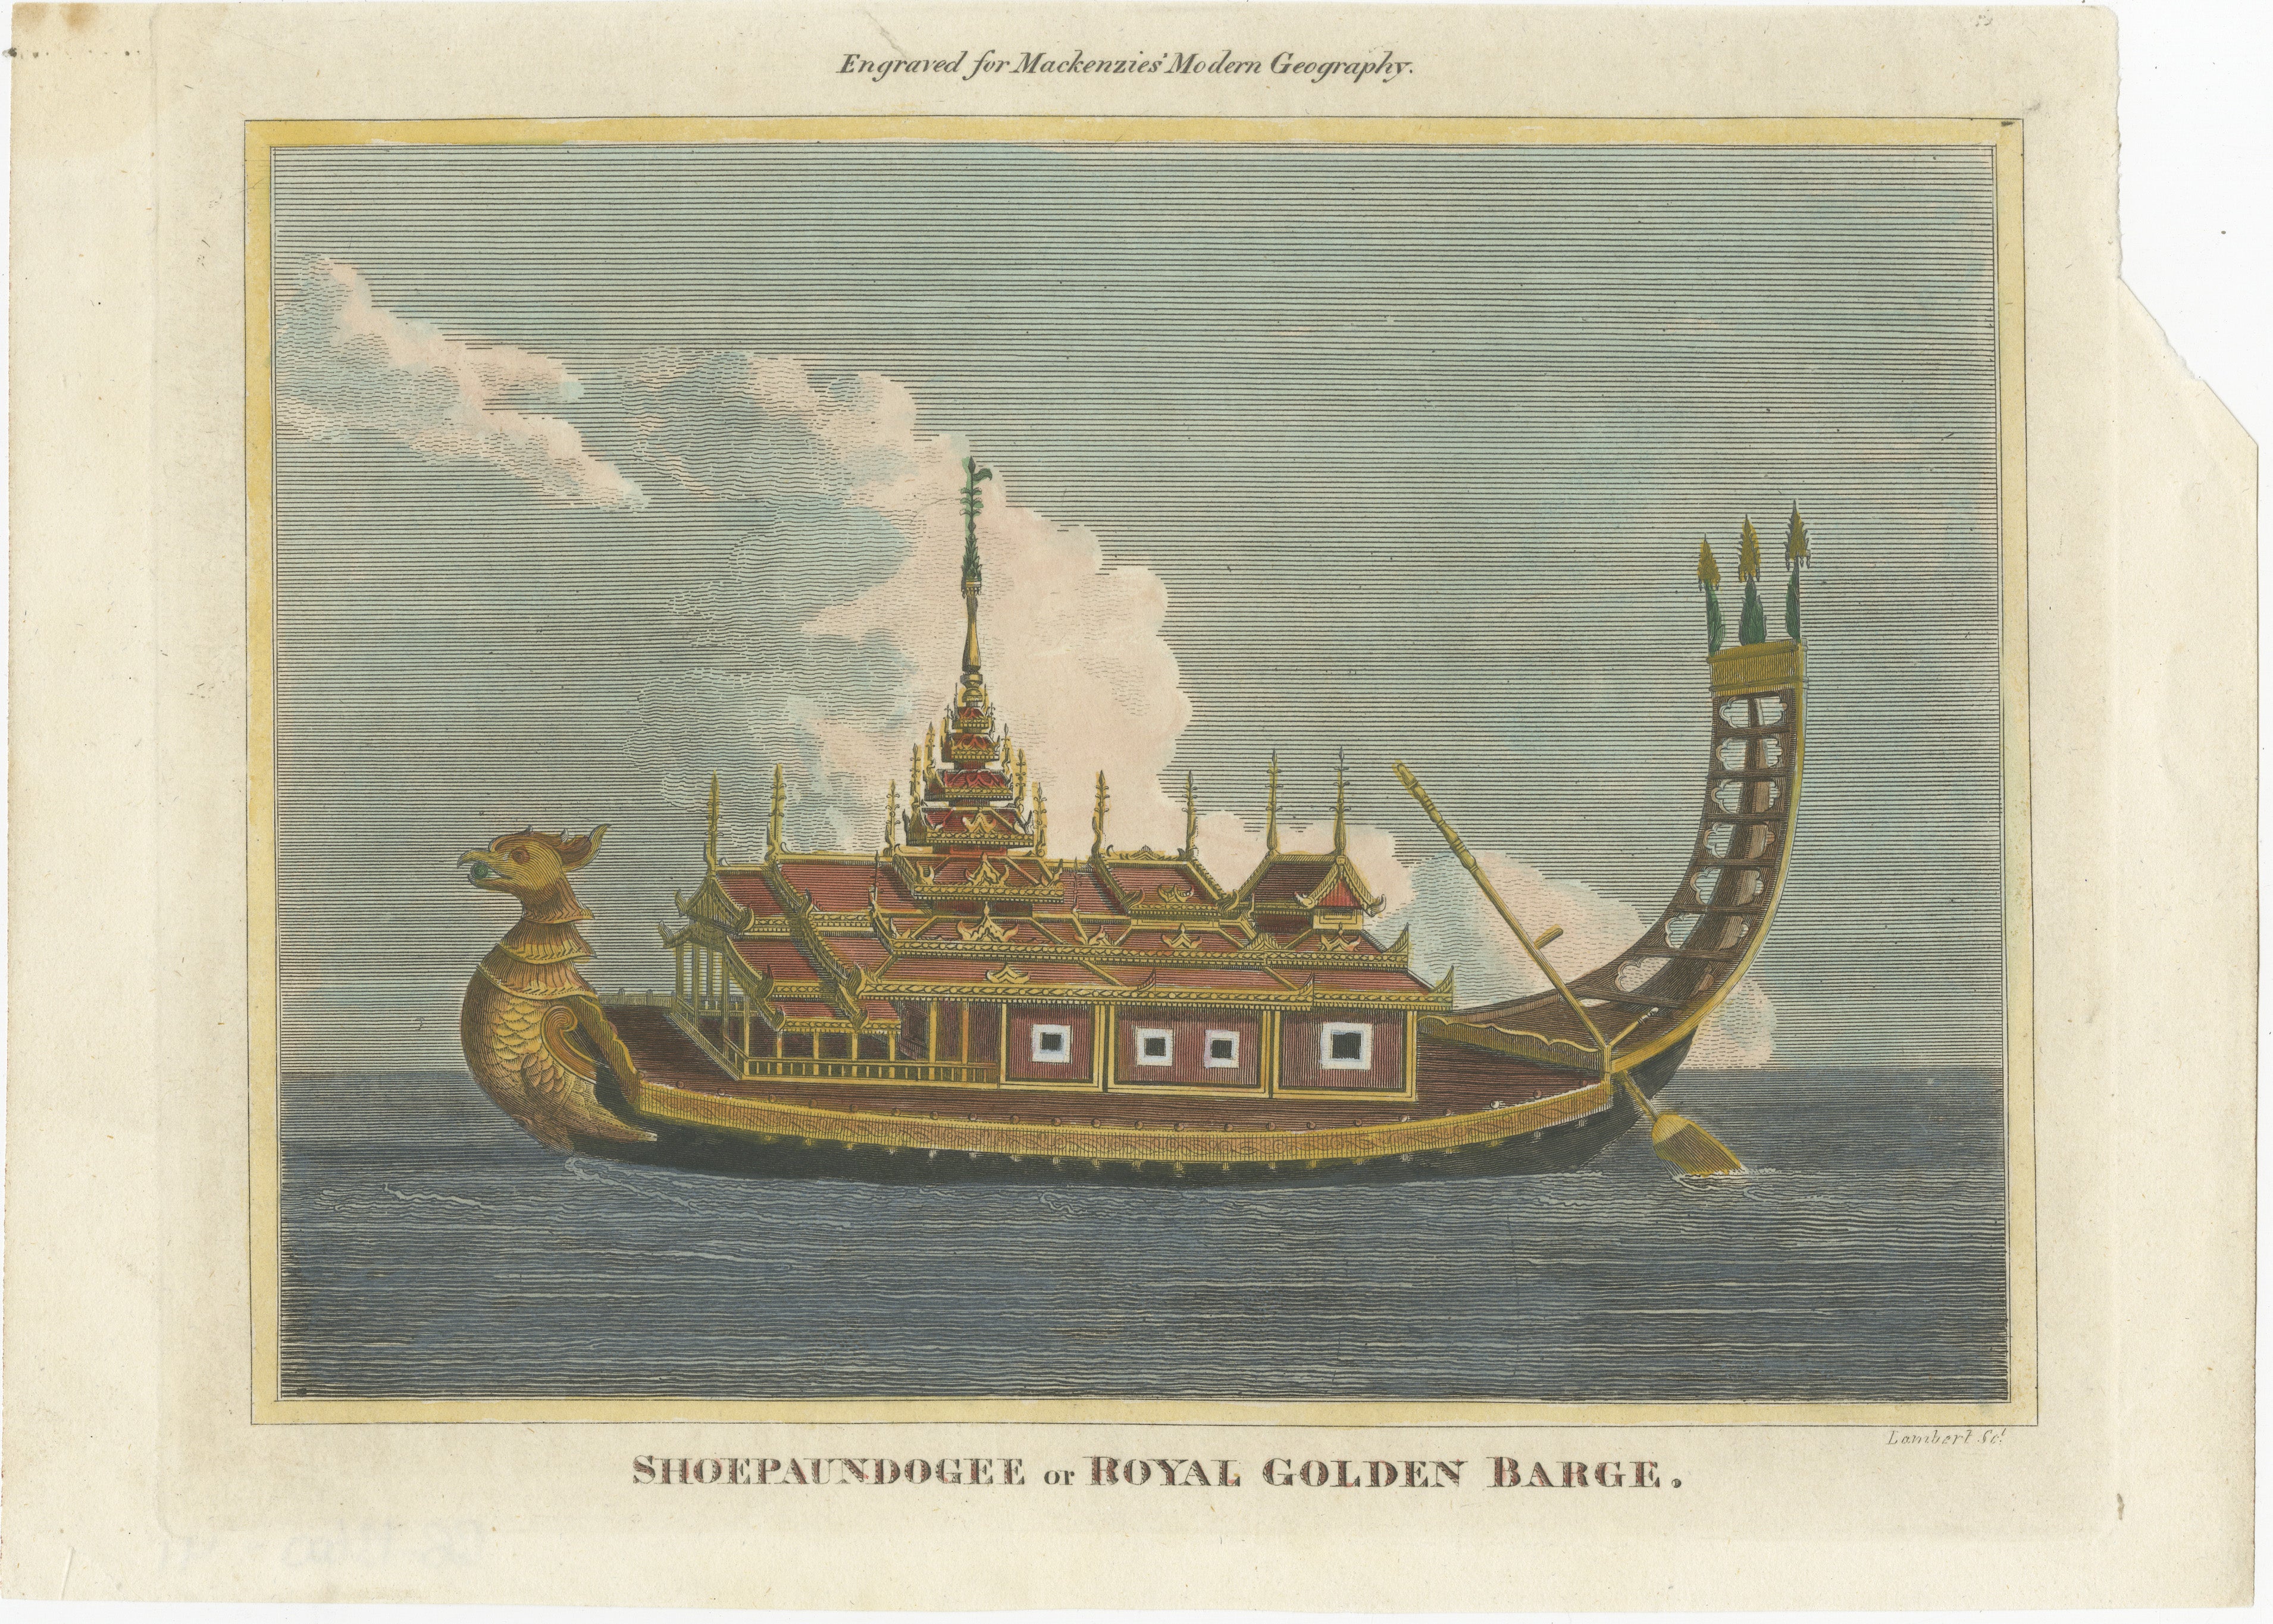 This majestic hand-colored engraving depicts the 